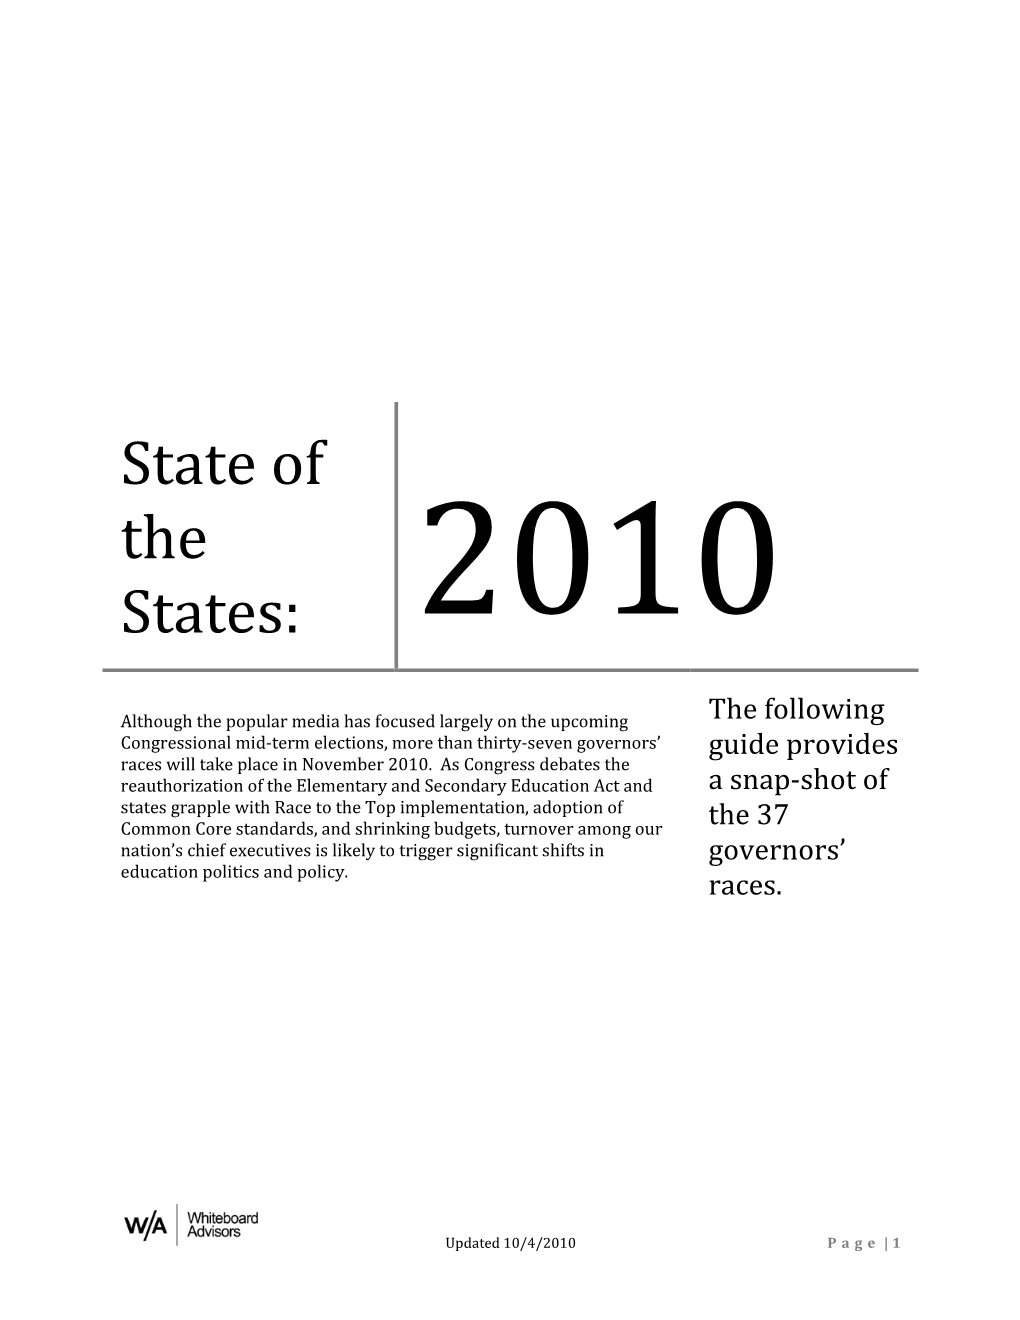 State of the States: 2010